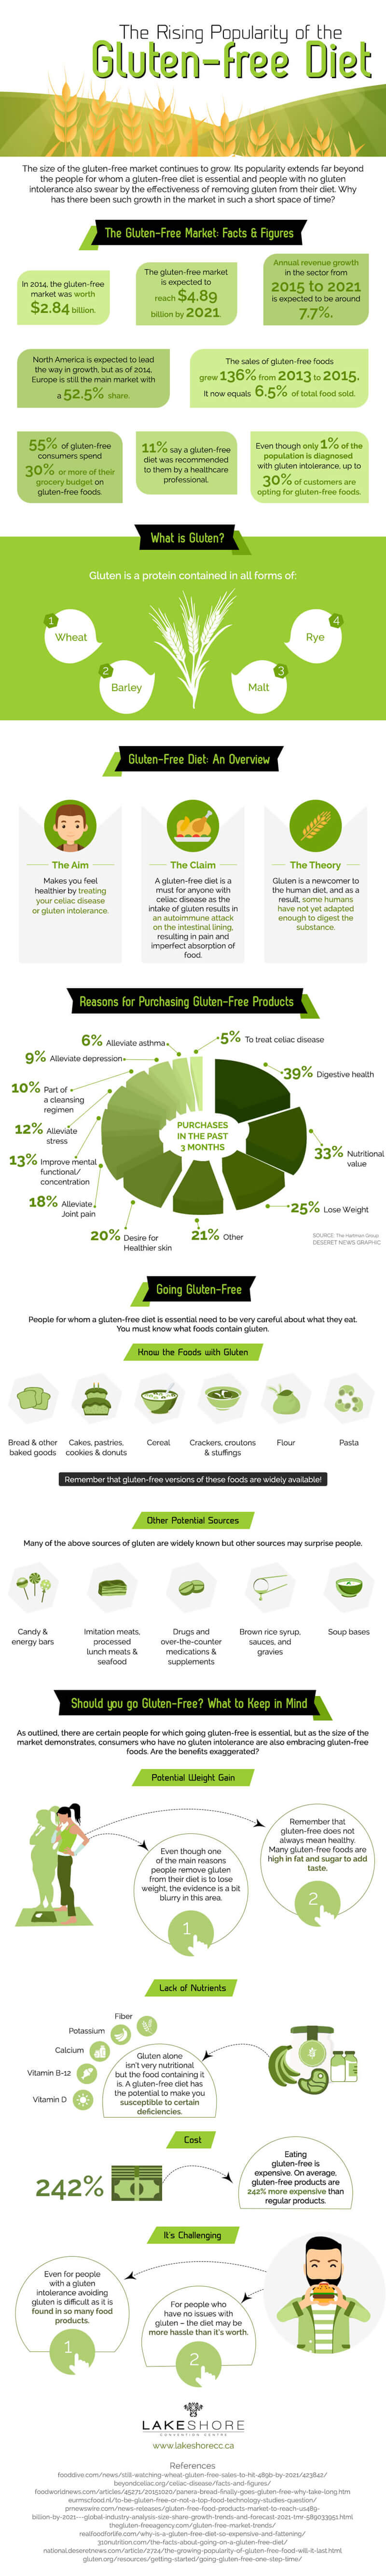 the-rising-popularity-of-the-gluten-free-diet-infographic